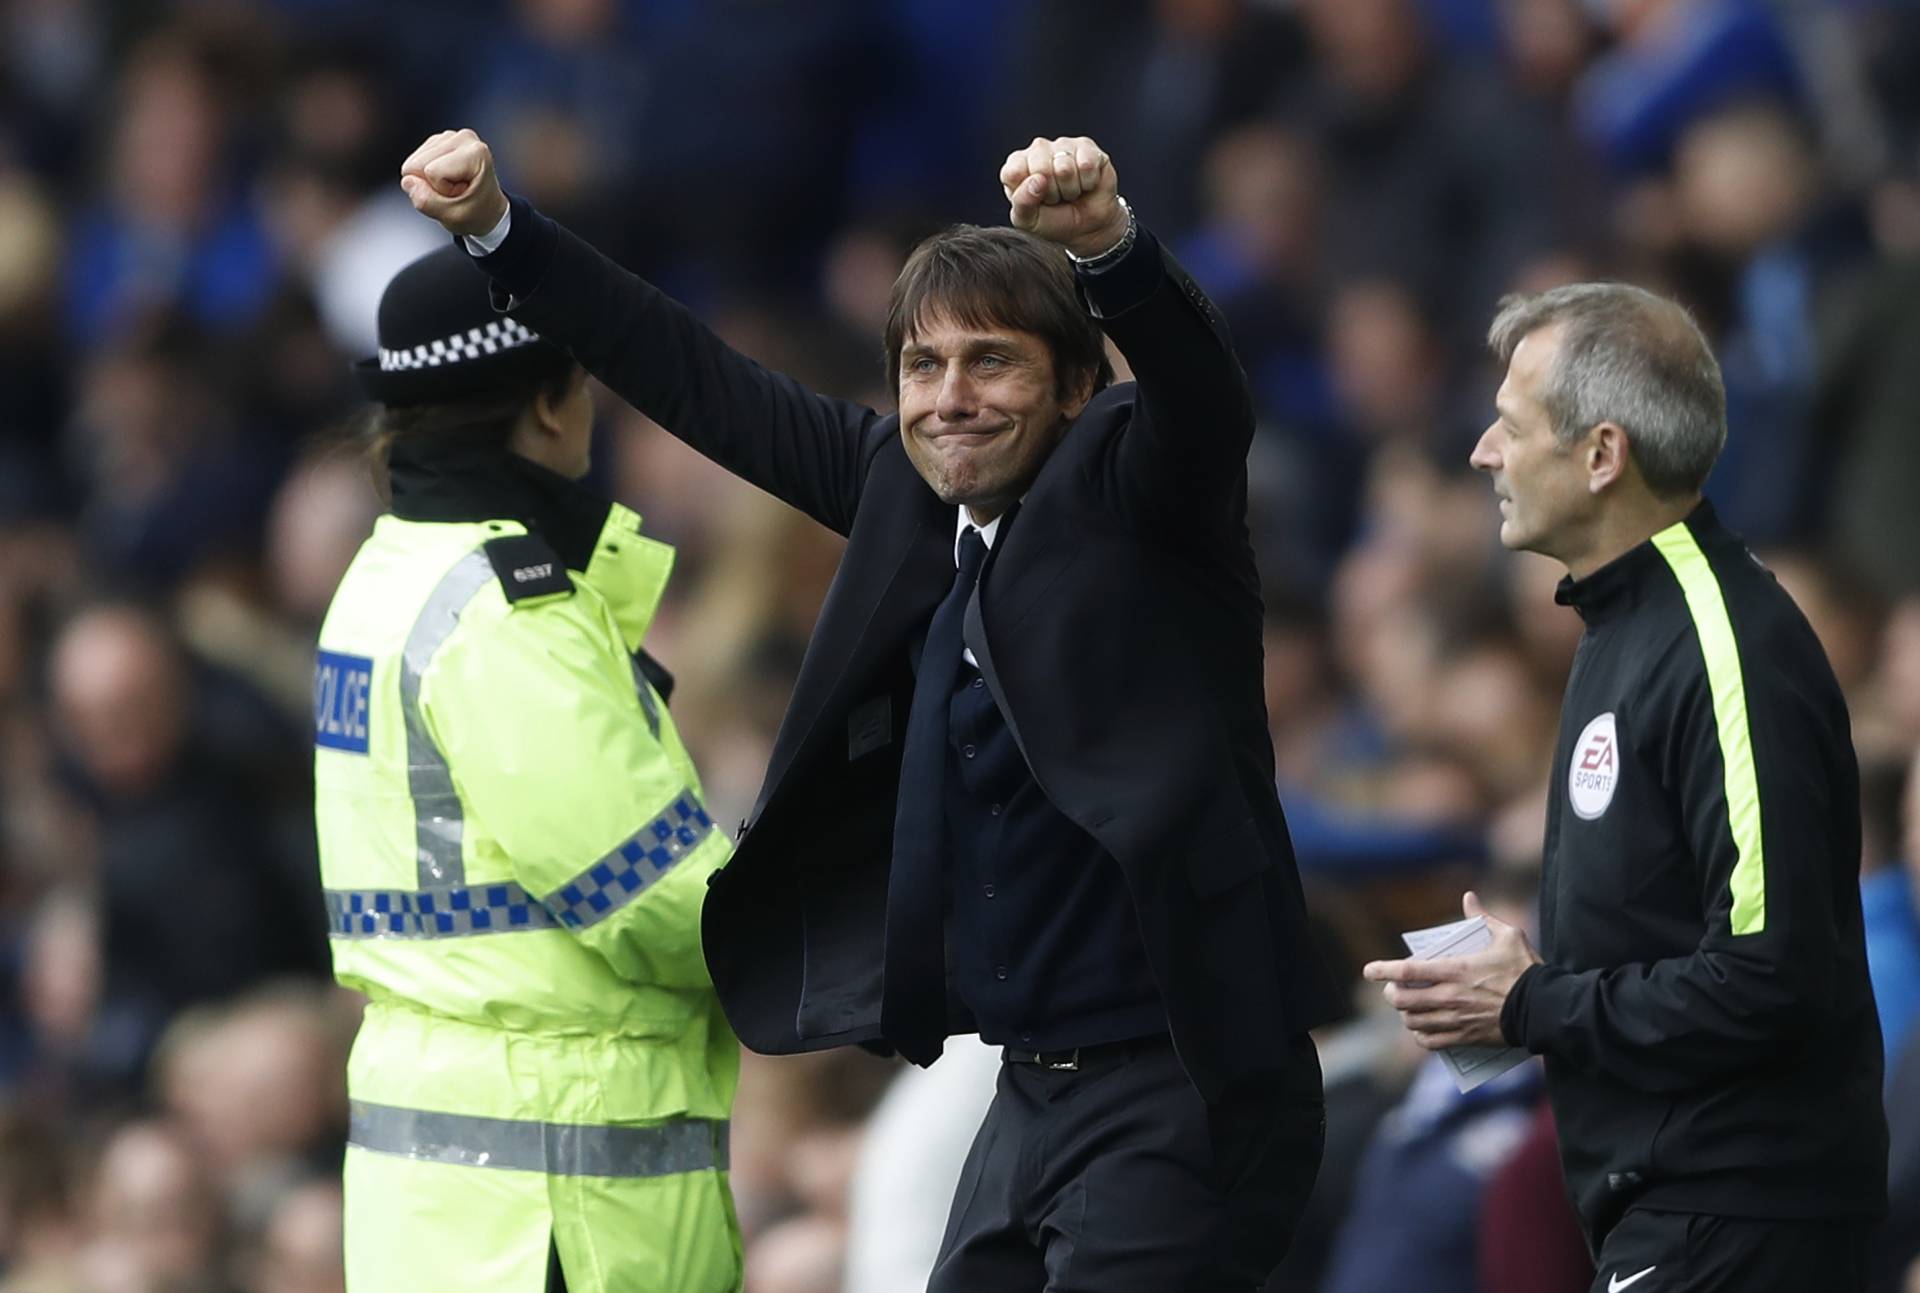 Chelsea manager Antonio Conte celebrates after Willian (not pictured) scores their third goal